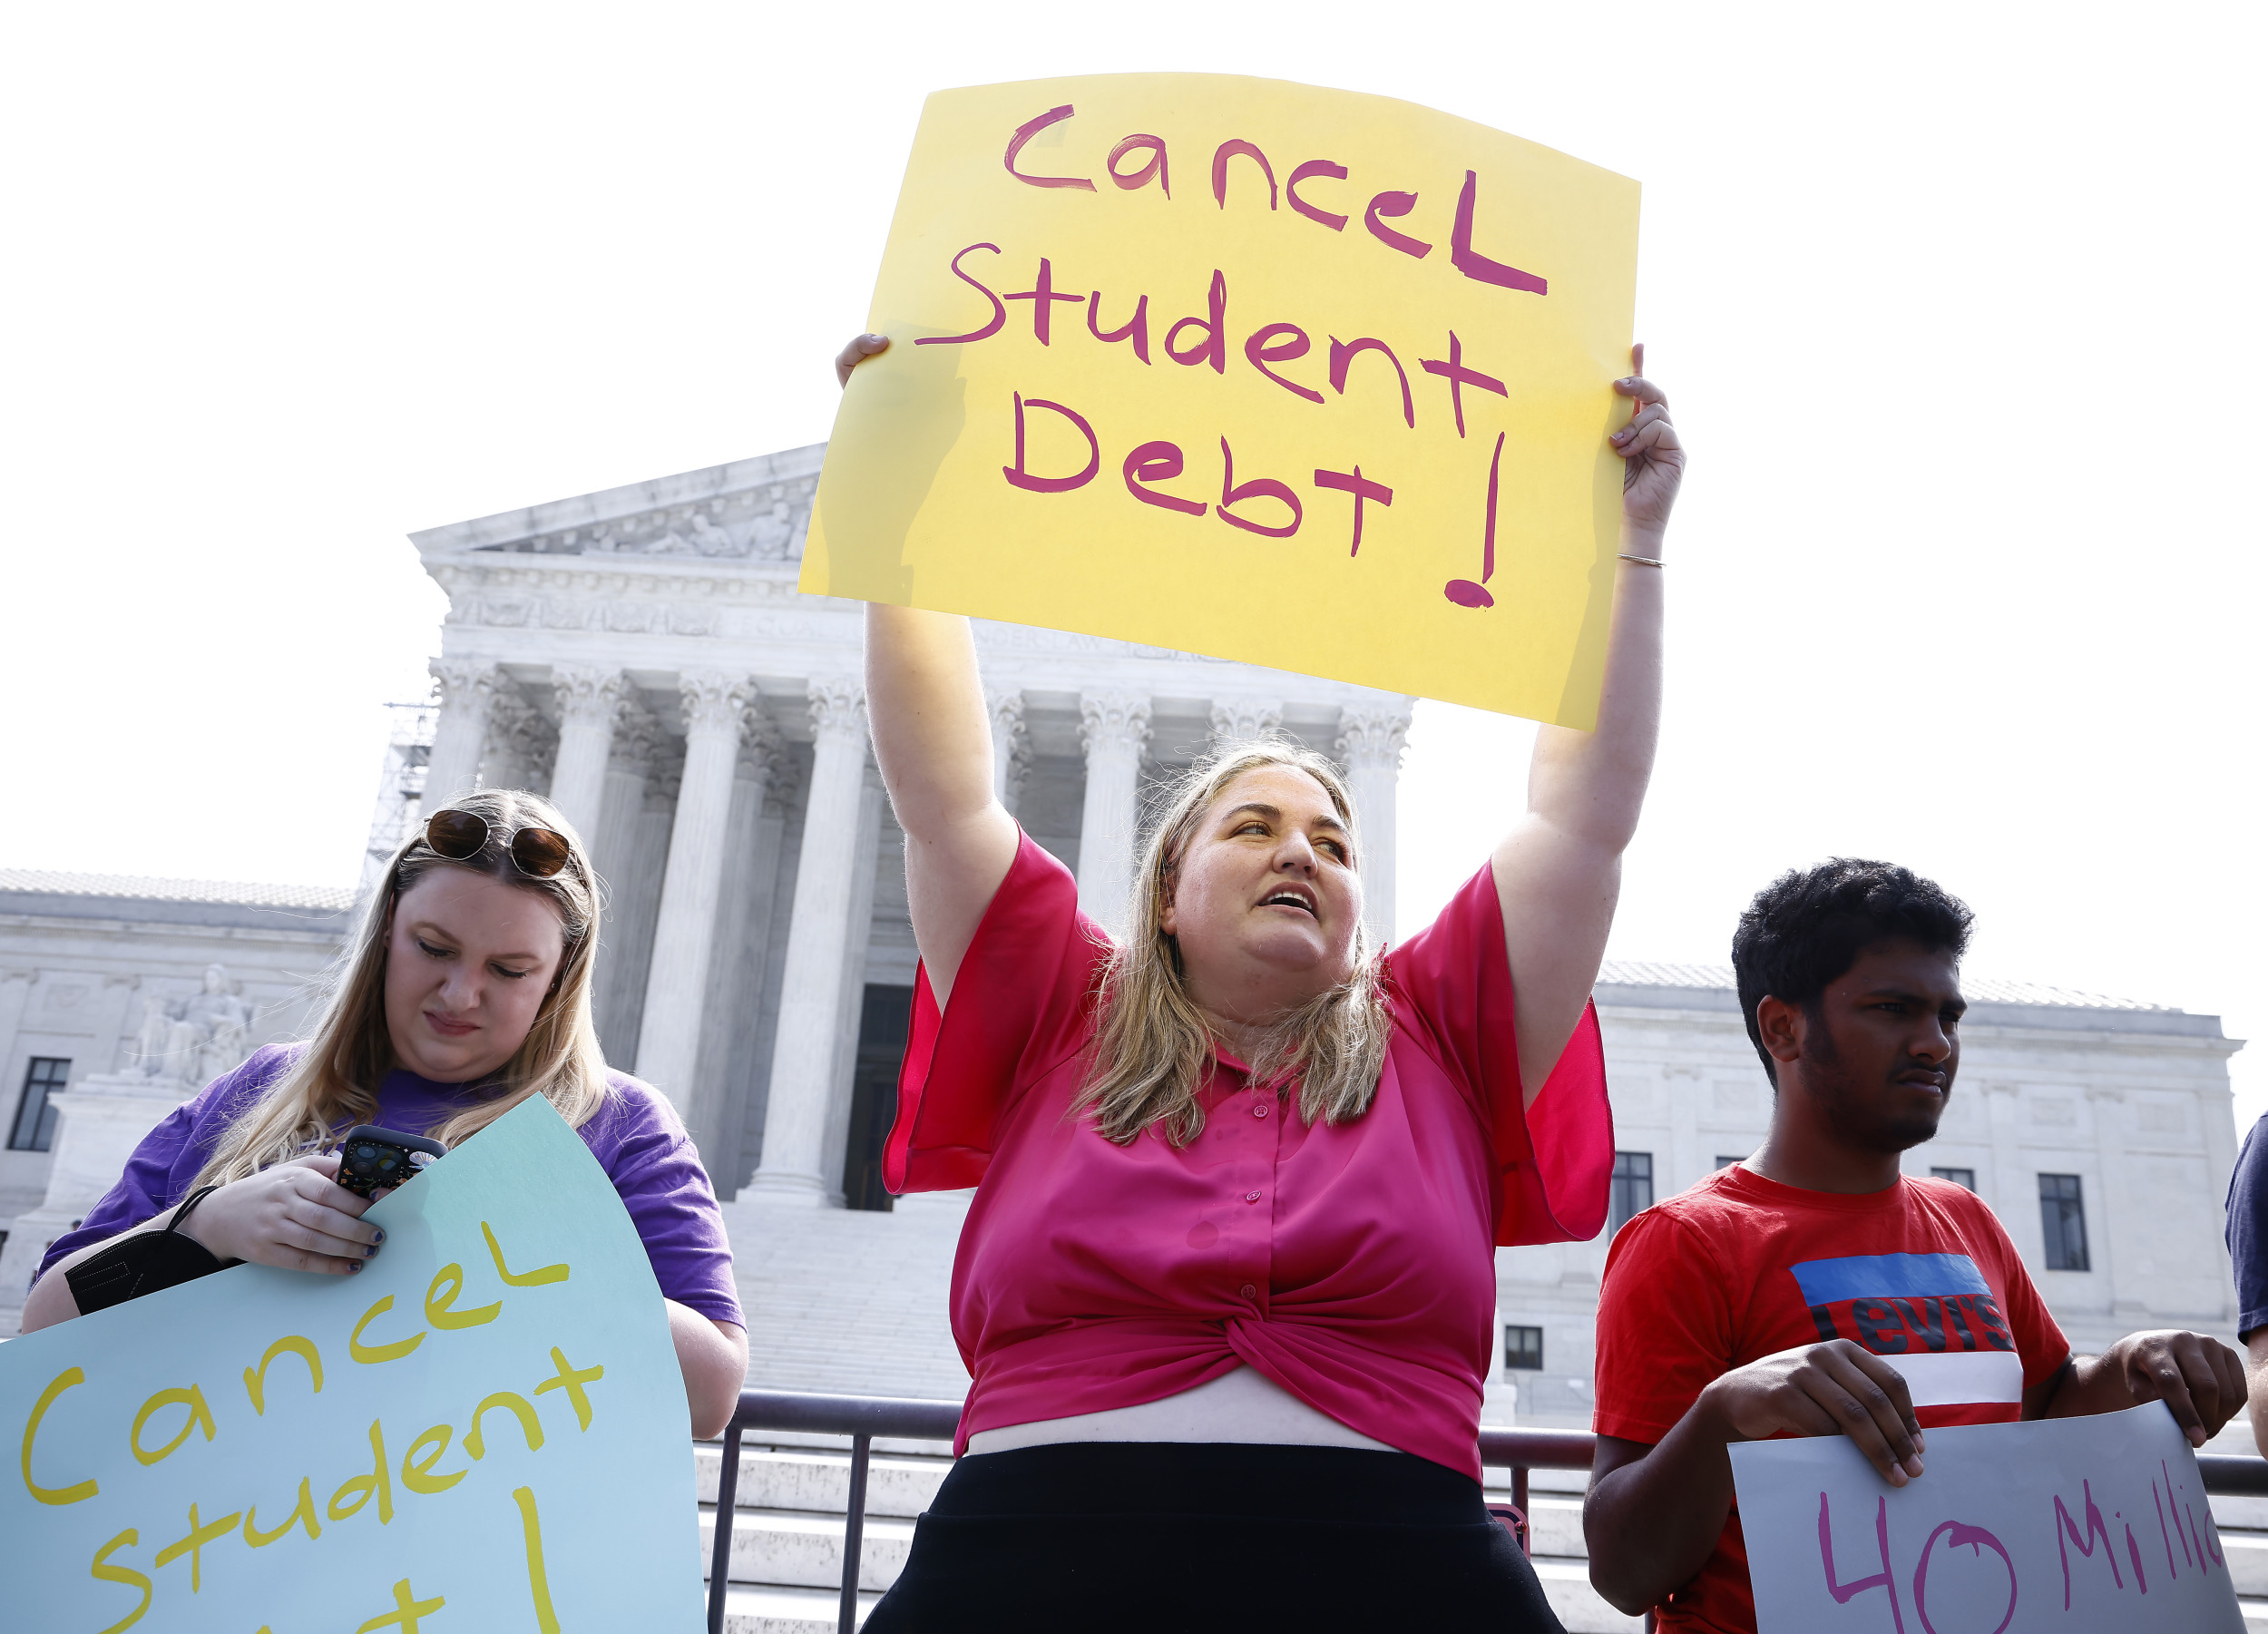 An elite student loan provider allegedly instructed its employees to put clients on wait